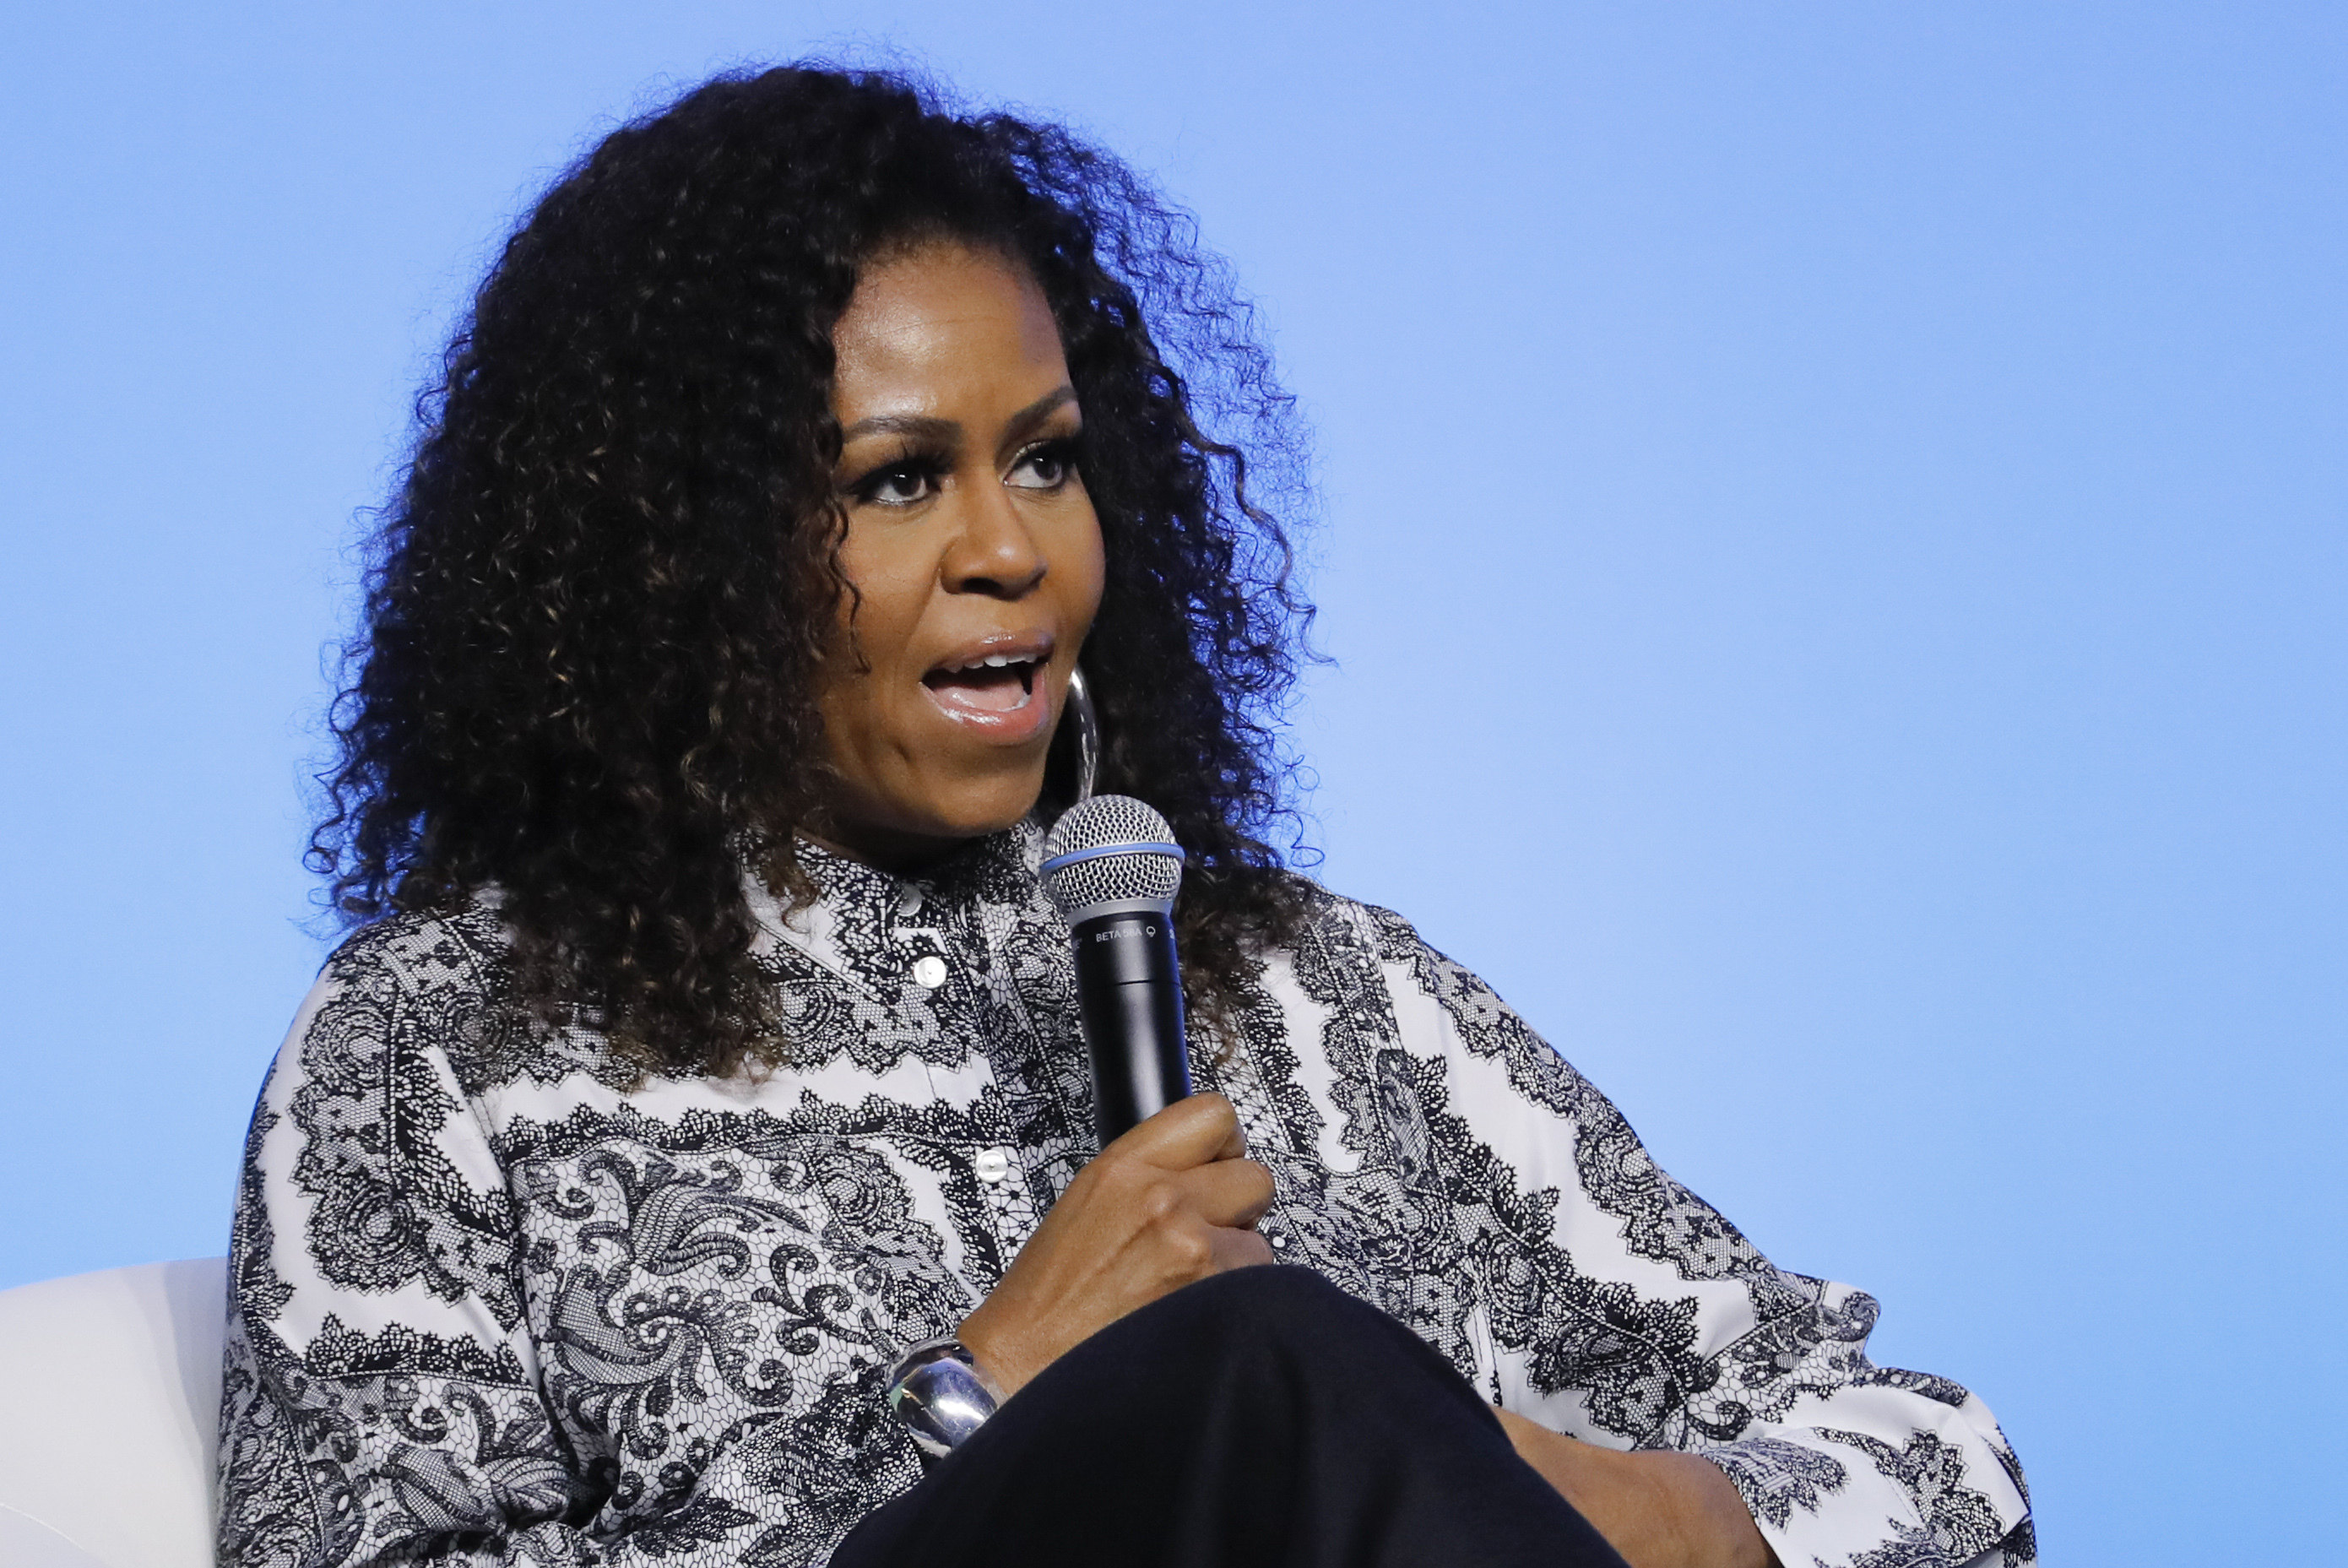 Michelle Obama speaks during an event in Kuala Lumpur, Malaysia. Photo: AP